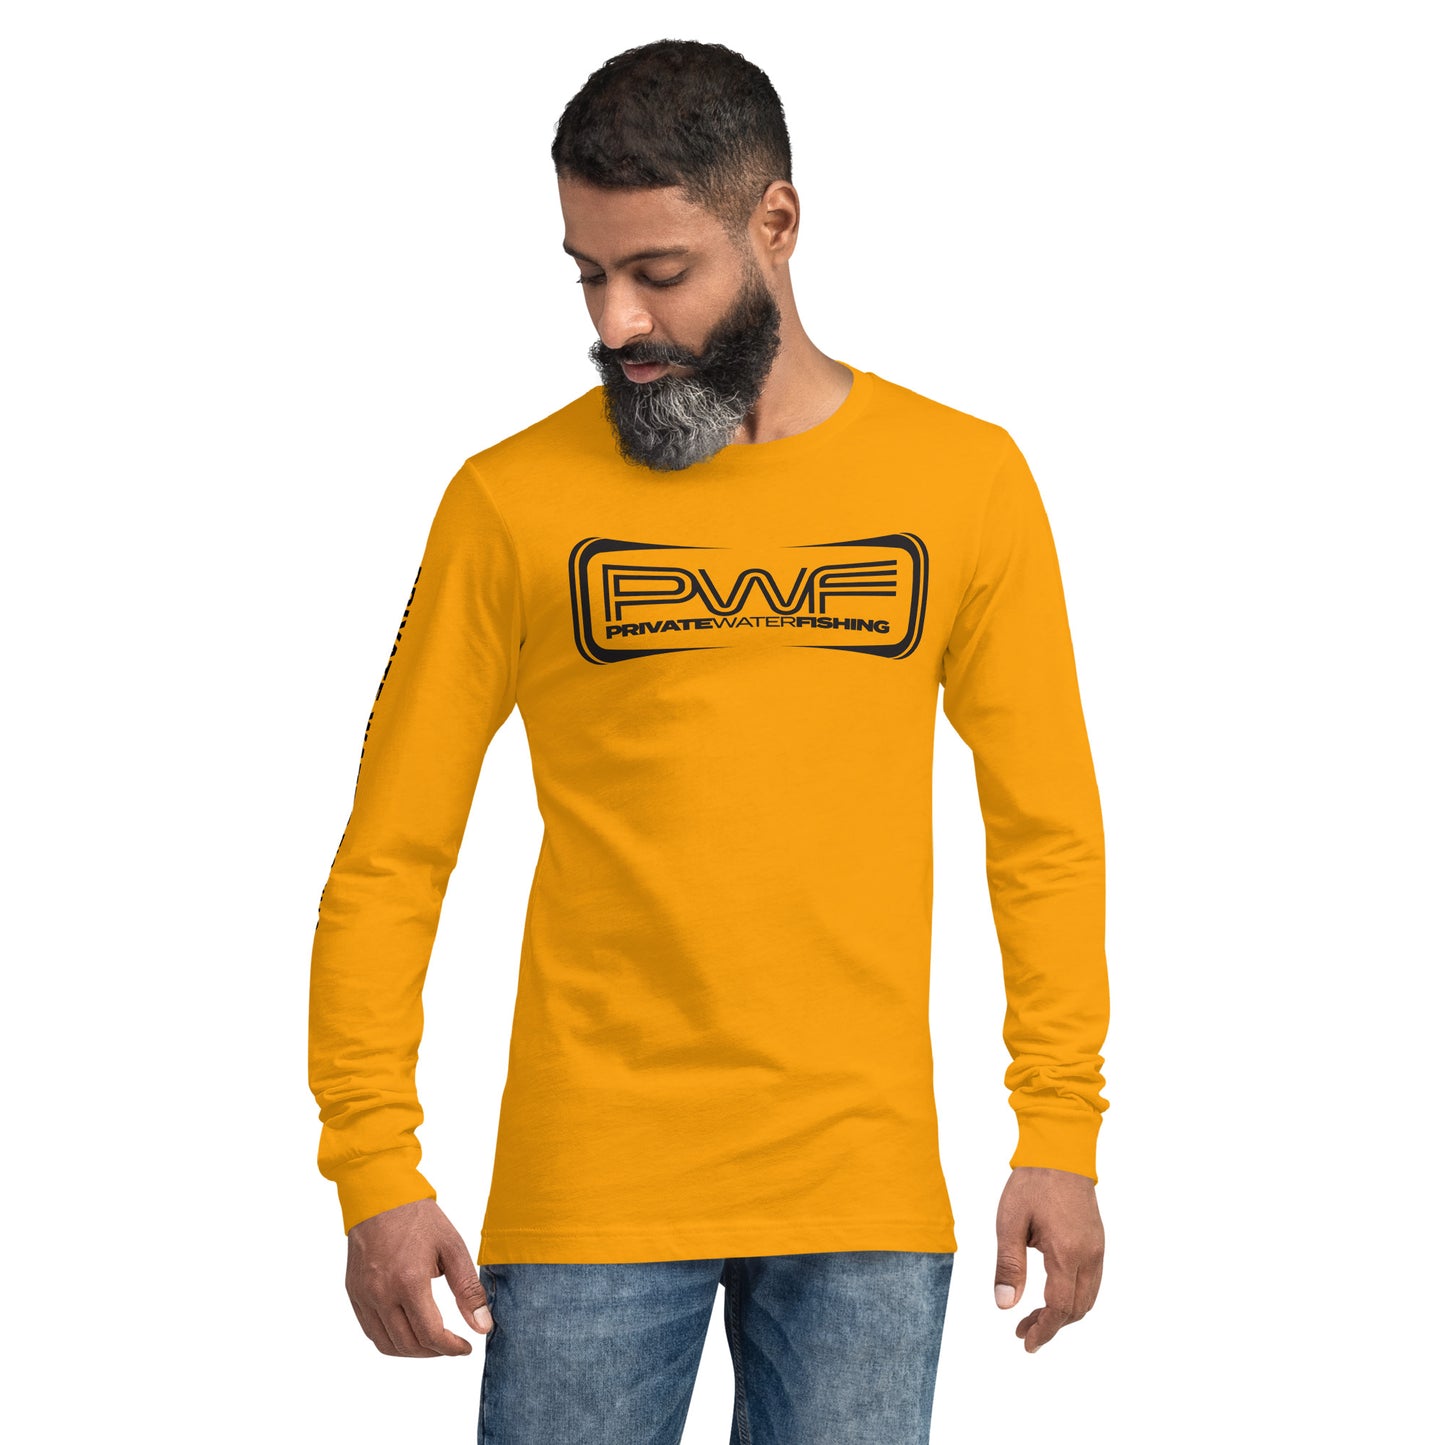 PWF Daily Driver Long Sleeve